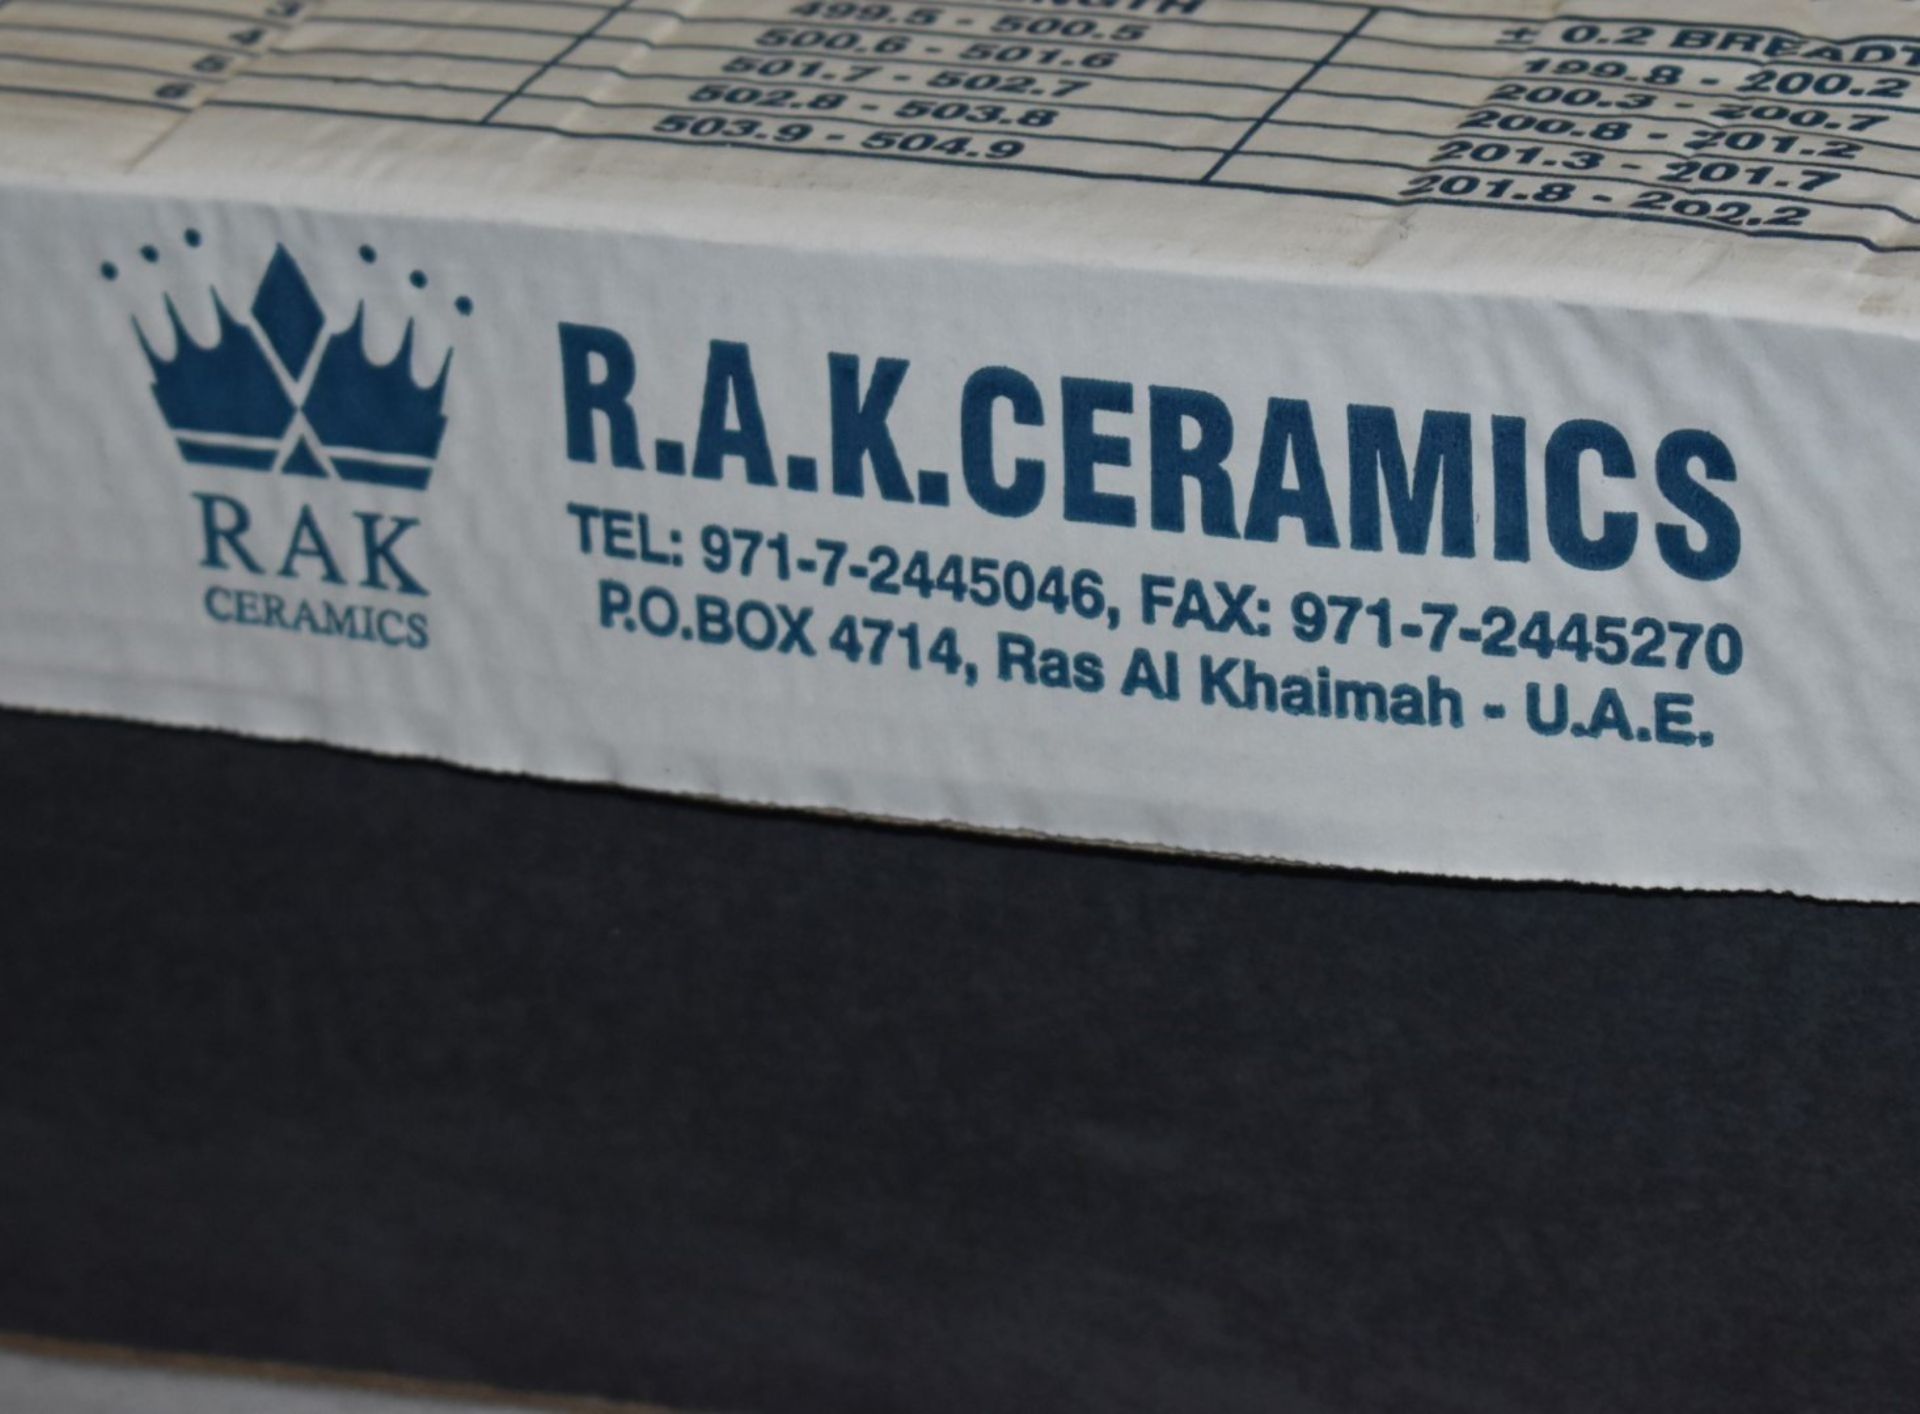 12 x Boxes of RAK Porcelain Floor or Wall Tiles - Dolomite Black - 20 x 50 cm Tiles Covering a Total - Image 9 of 9